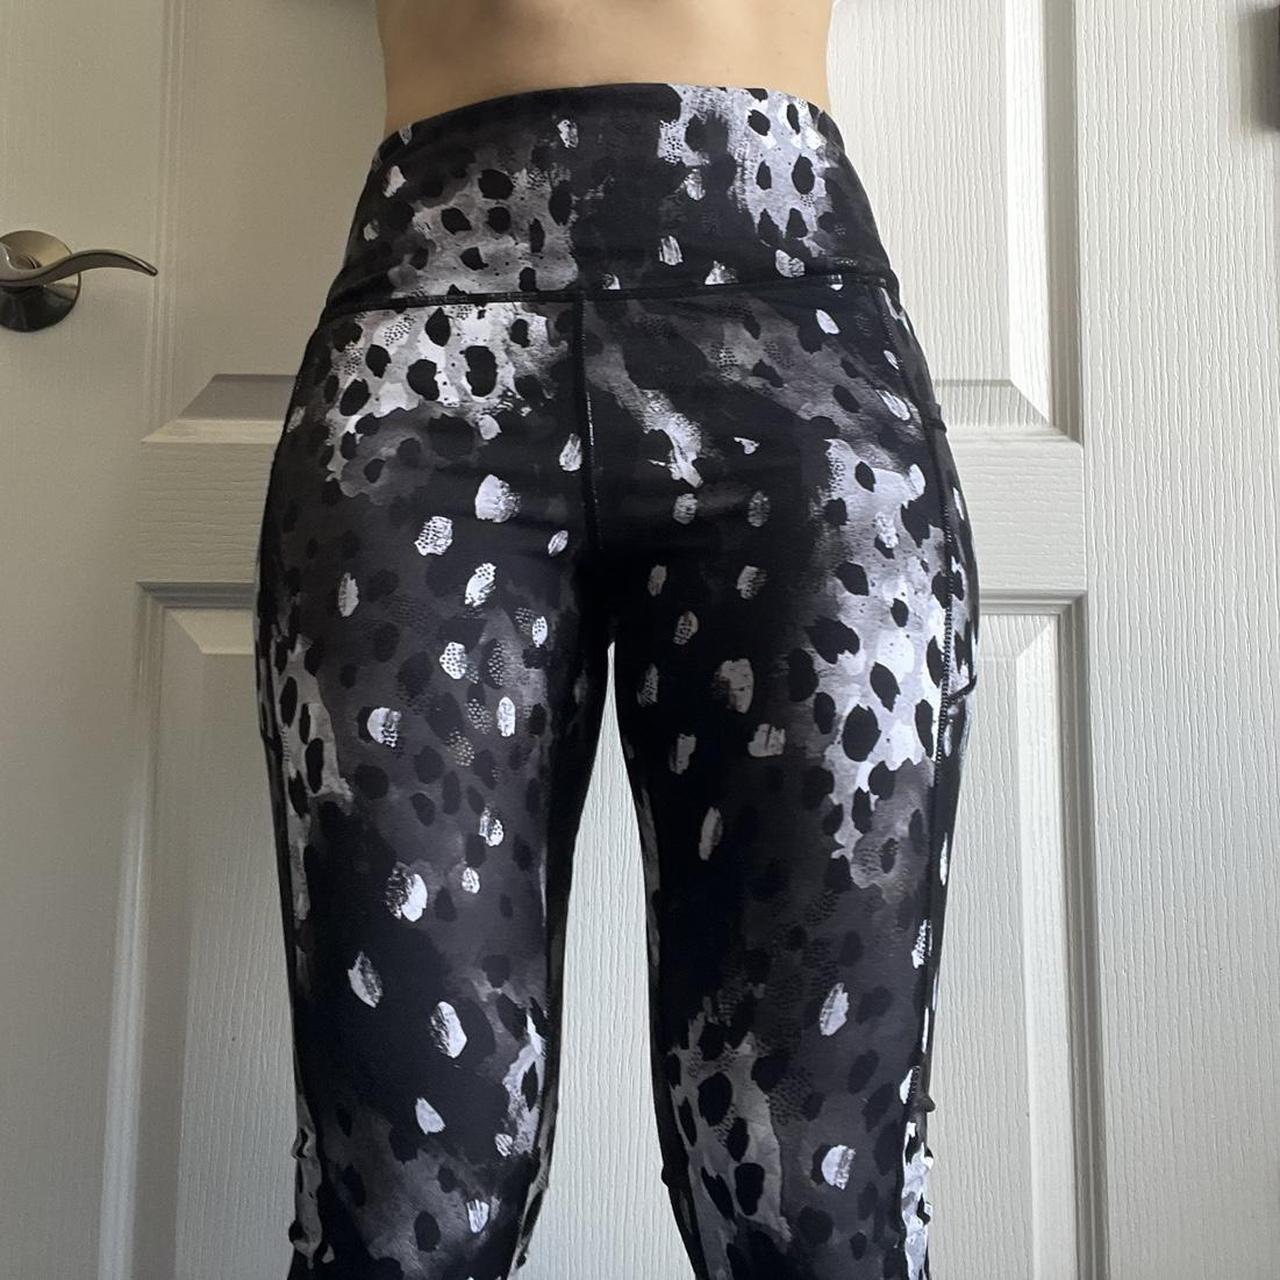 Gaiam yoga pants with pockets Black and grey - Depop